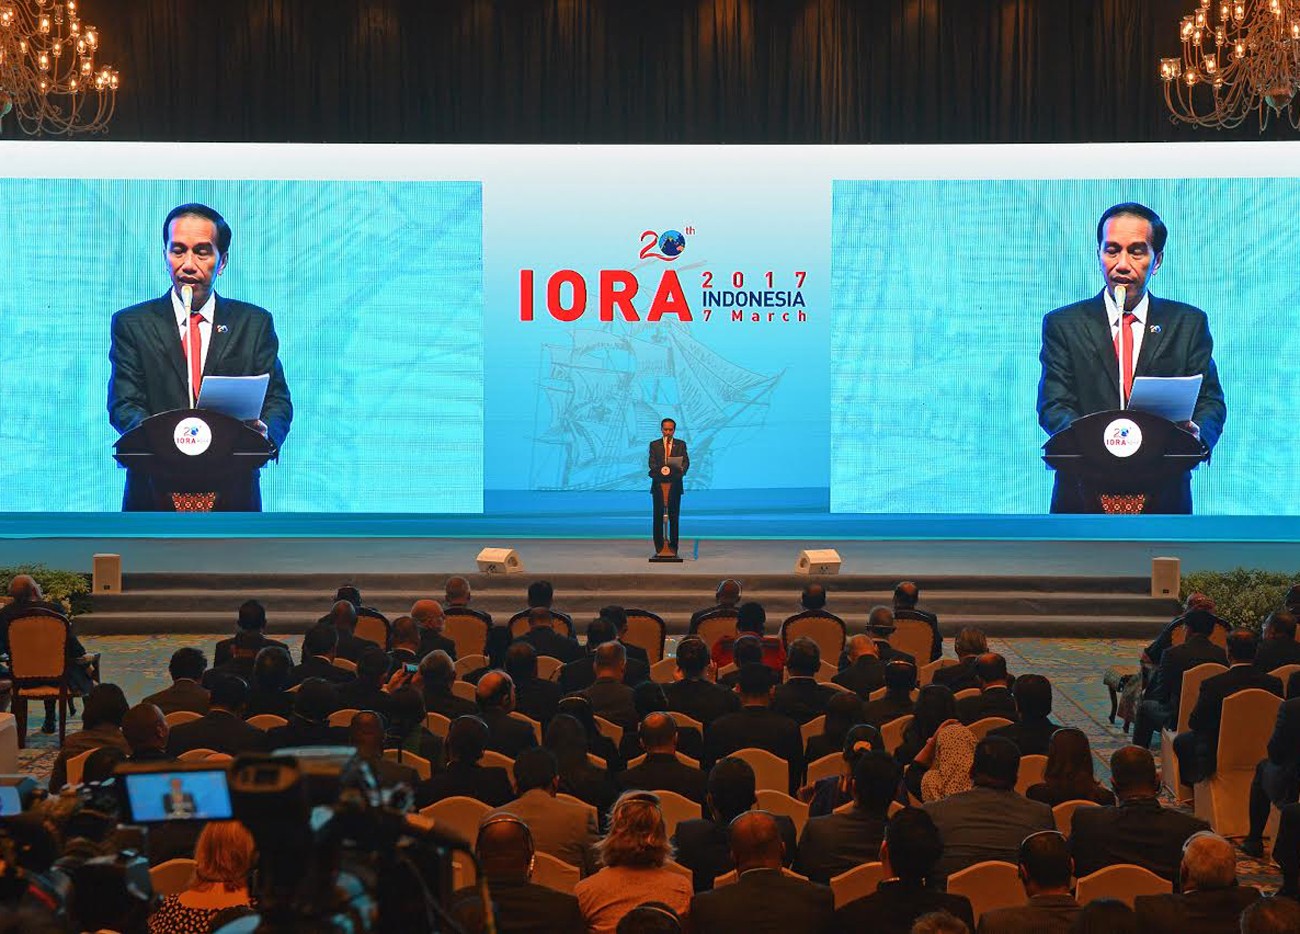 President Joko "Jokowi" Widodo delivers his speech at the Indian Ocean Rim Association (IORA) leaders' summit in Jakarta on Tuesday. Image: Courtesy of Presidential Office/Wahyu Putro A